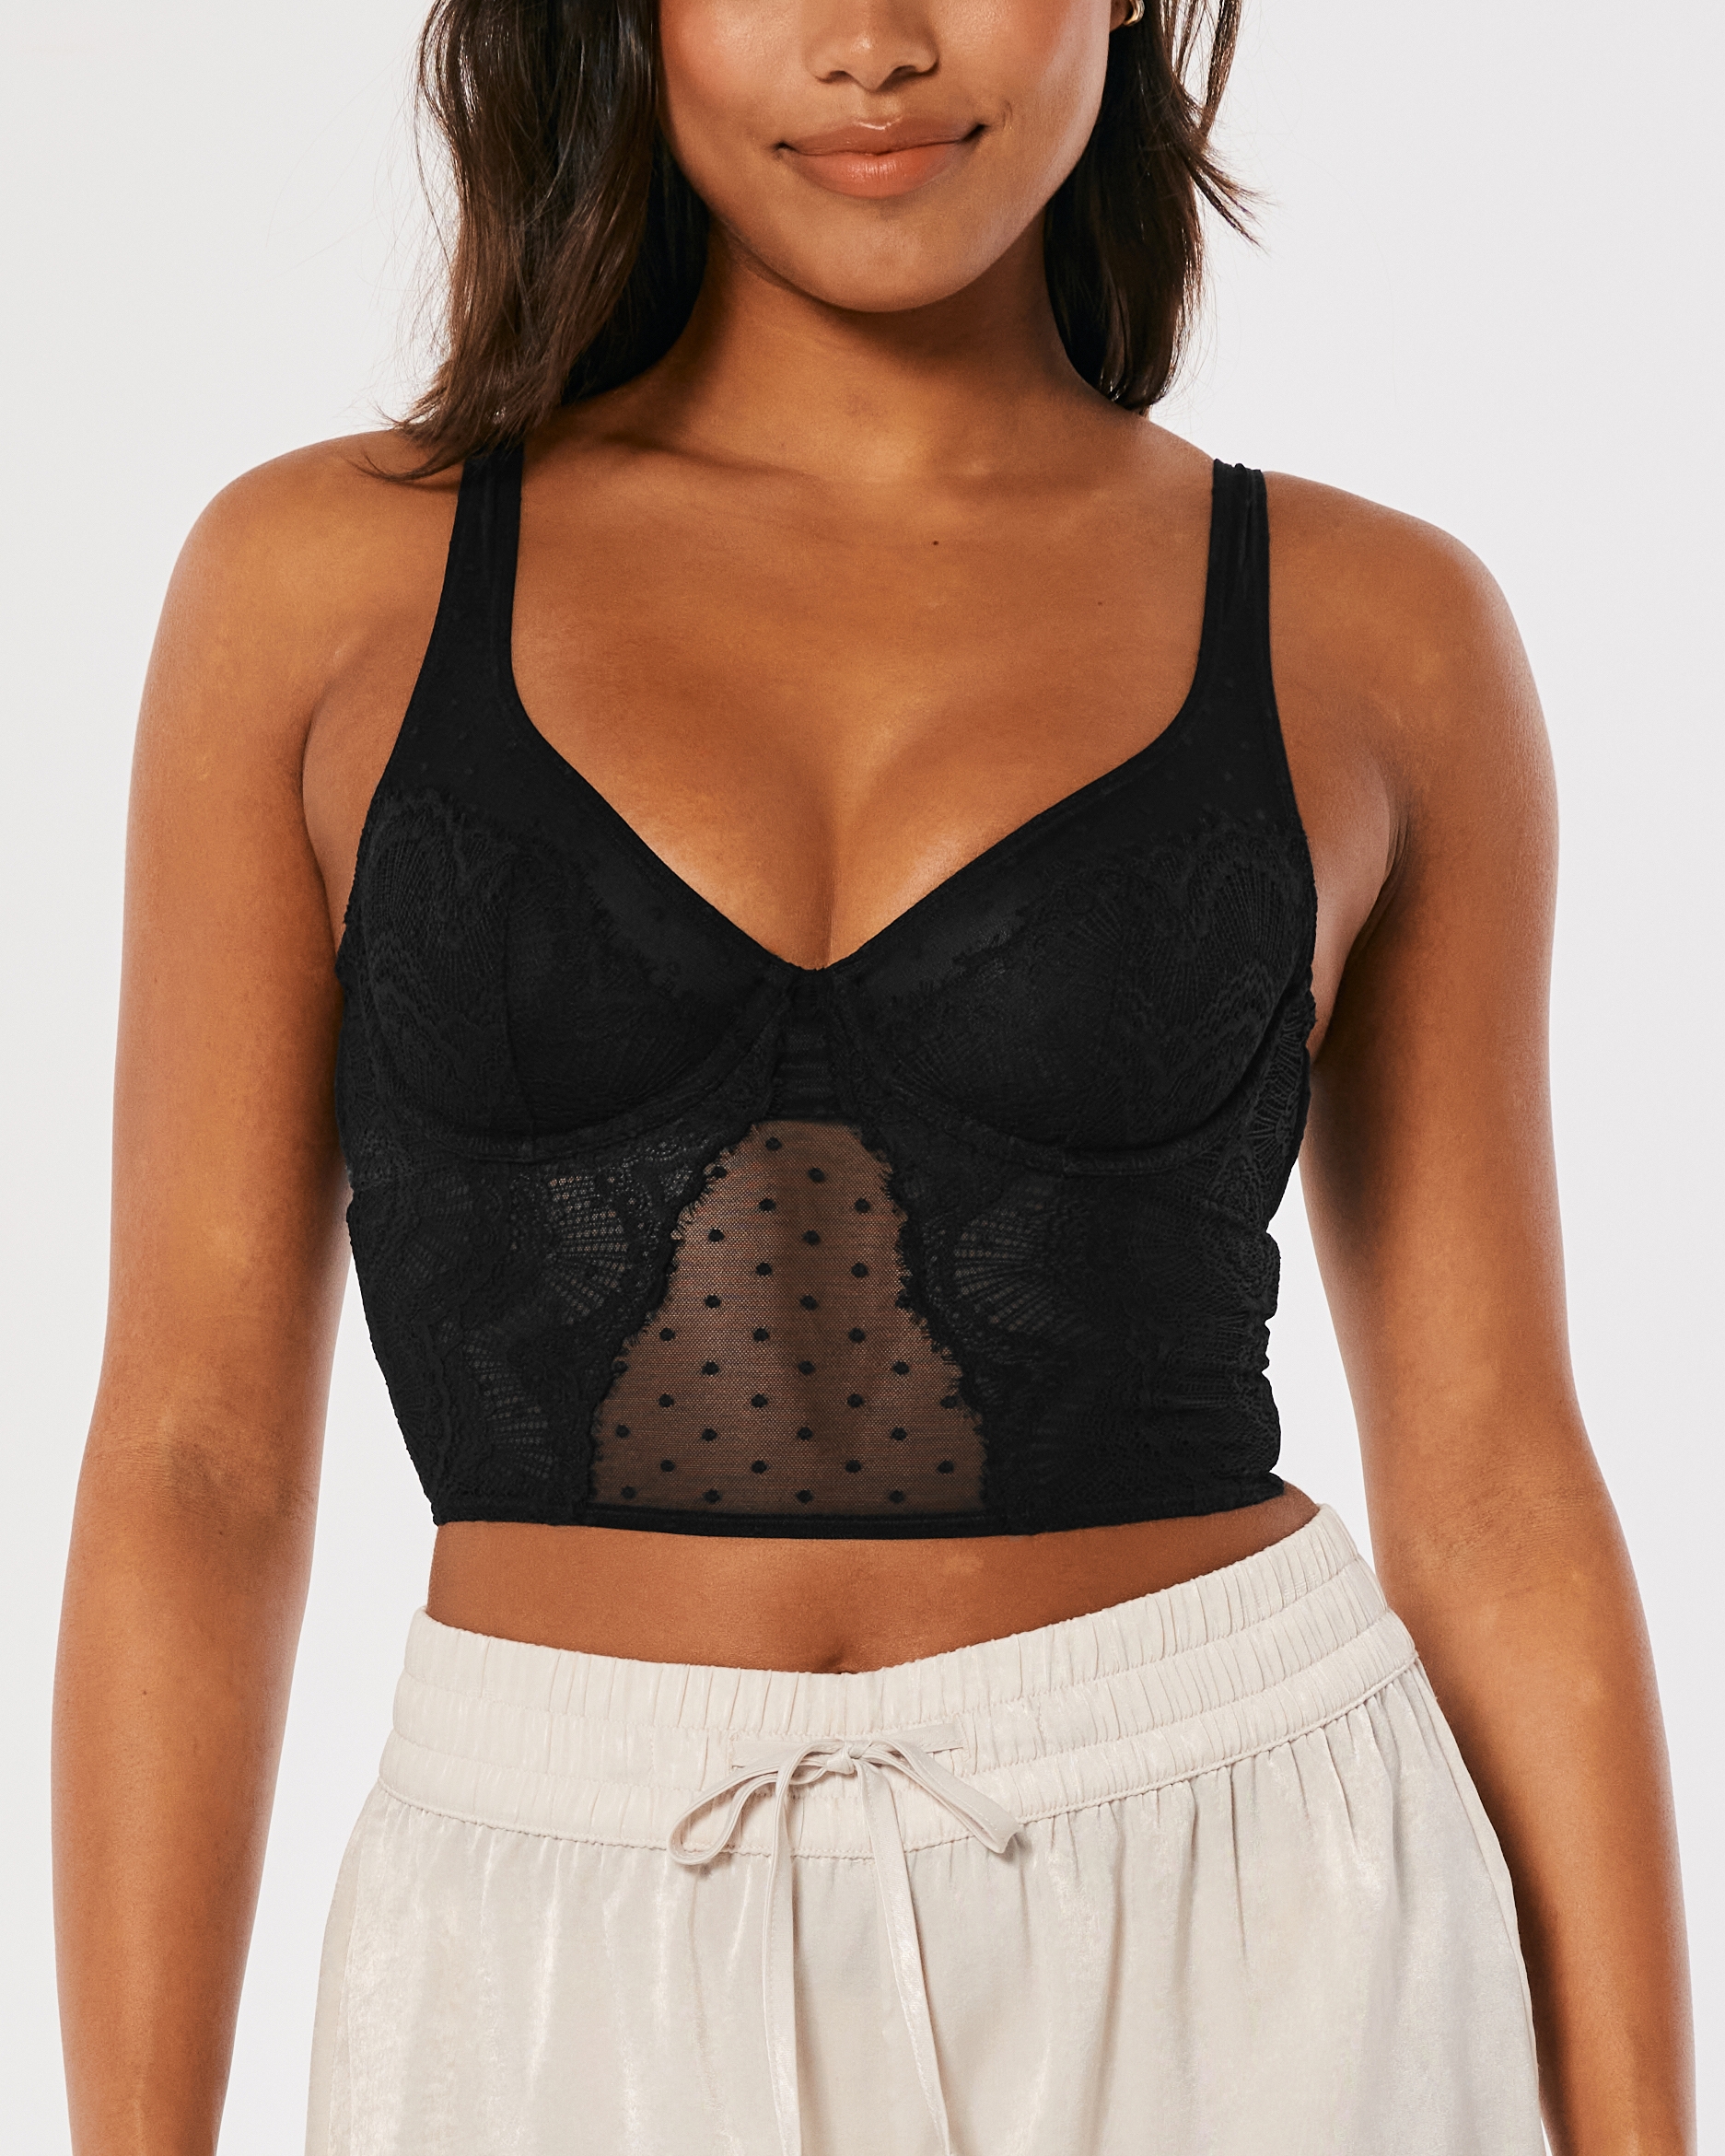 gilly hicks lace + mesh bustier